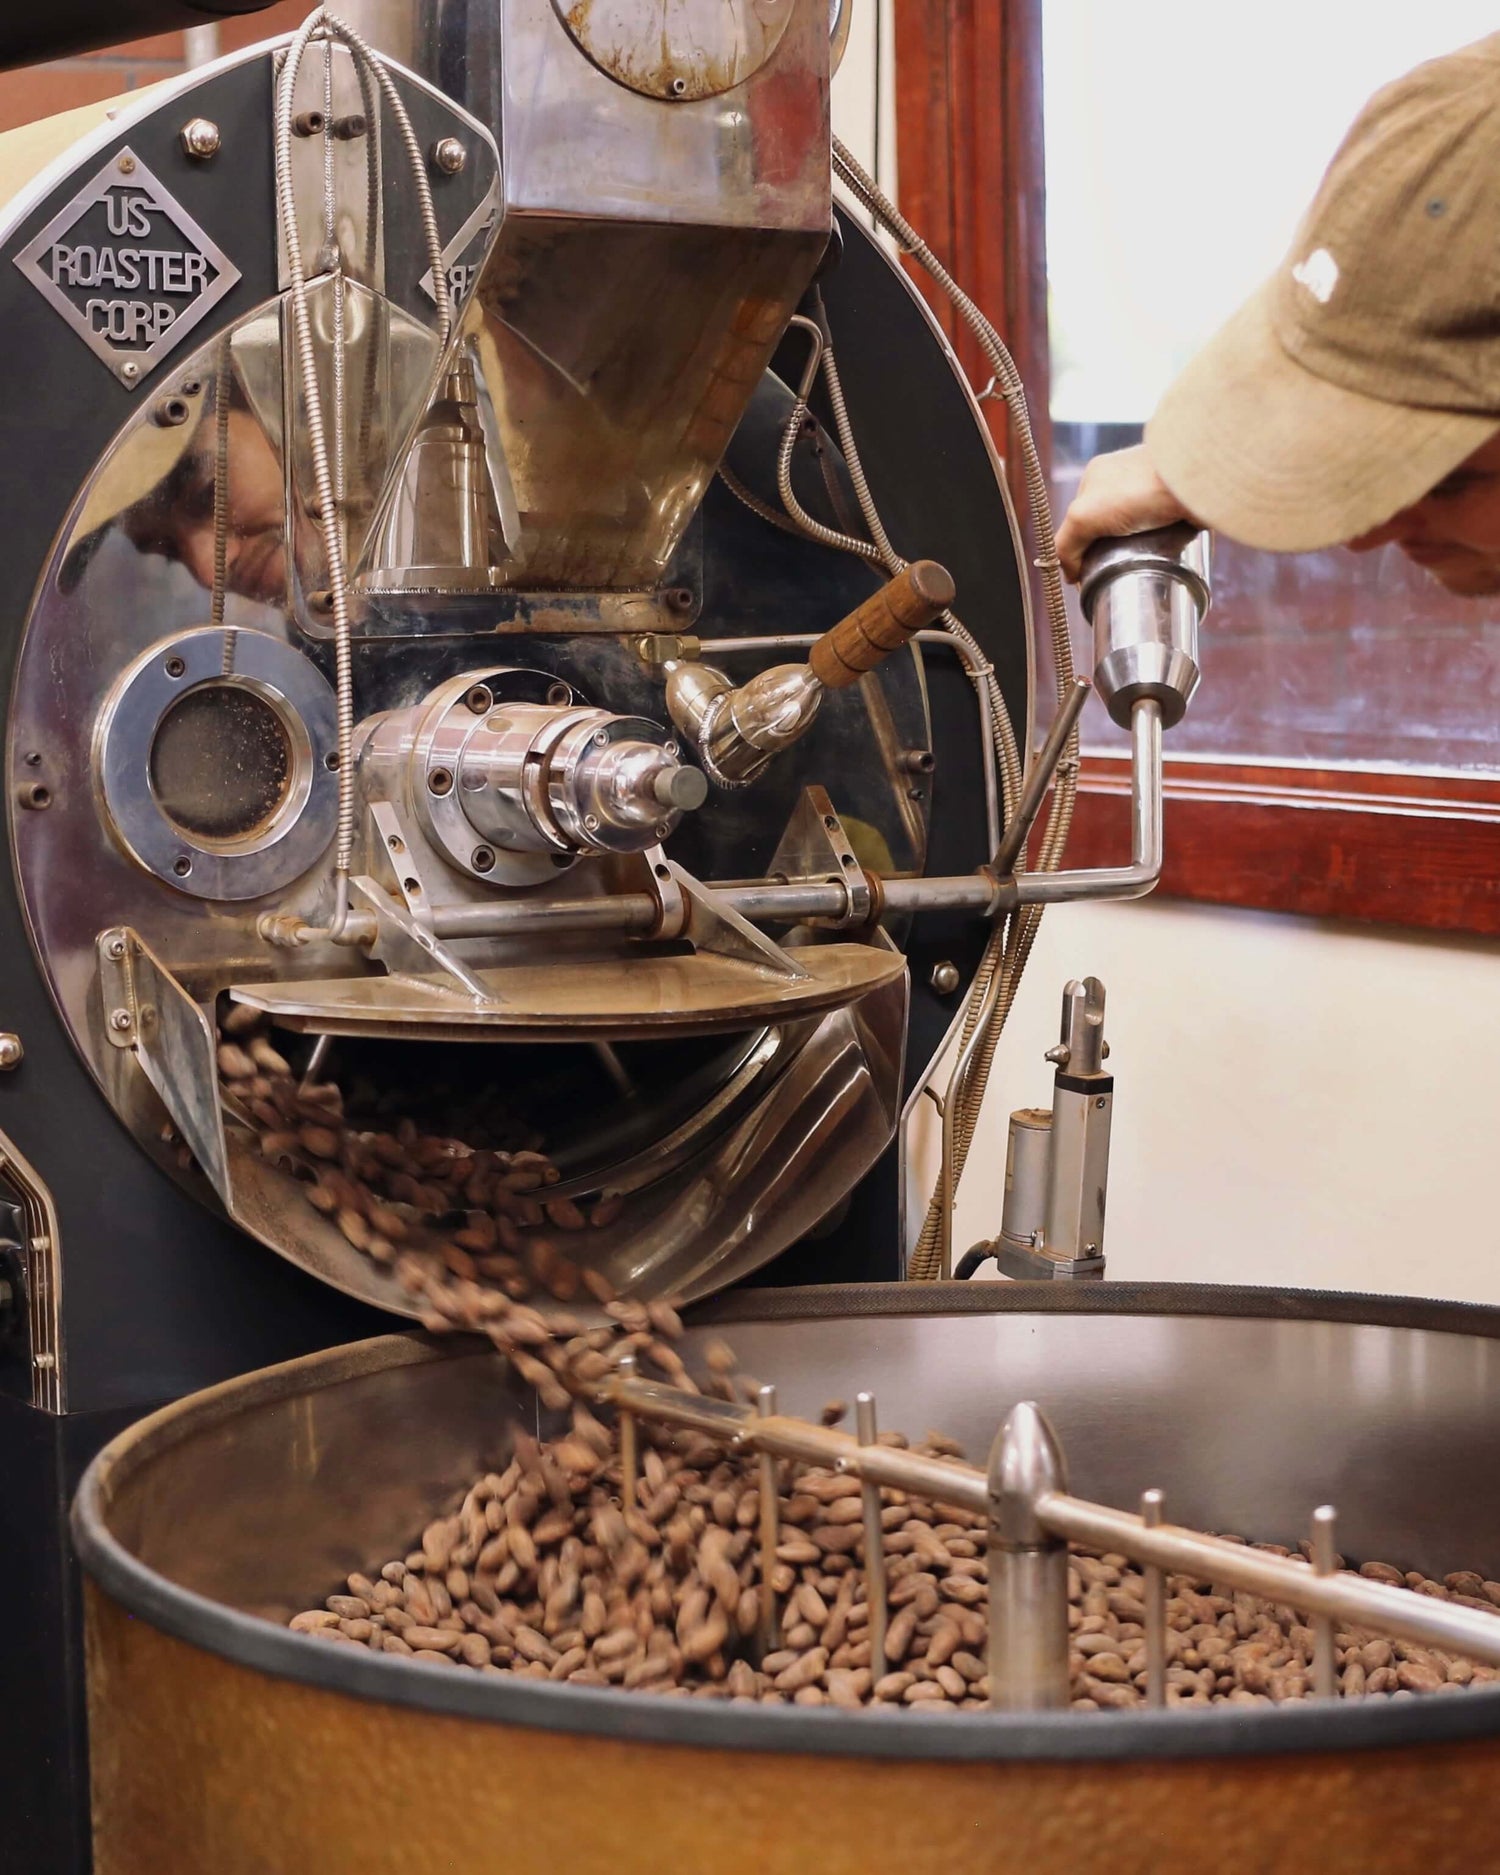 Image of cacao beans being roasted in industrial coffee roasting machine